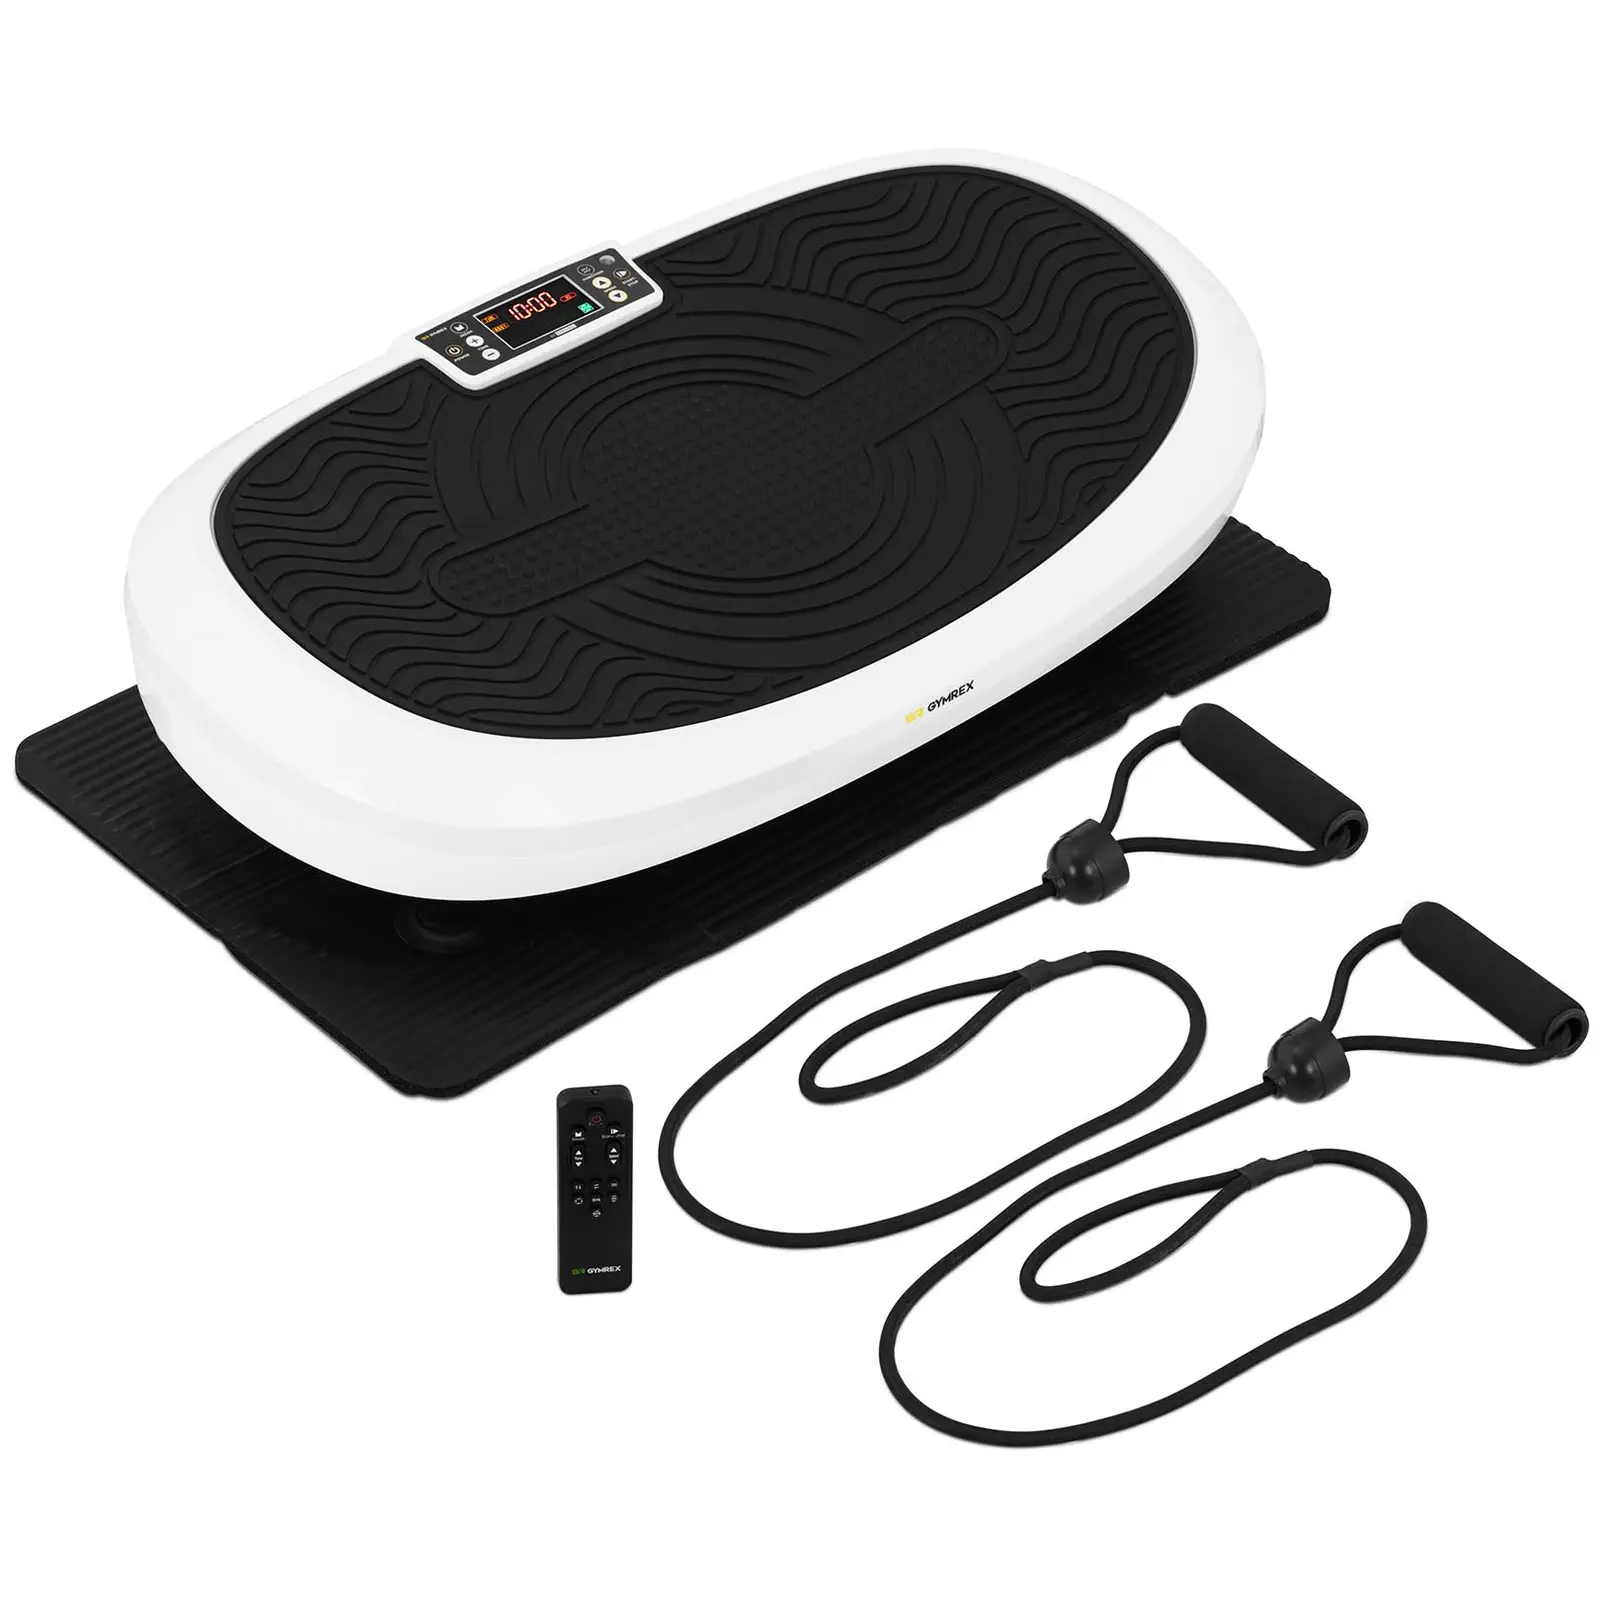 Vibration Plate - 60.5 x 34.5 cm - up to 120 kg - Remote Control